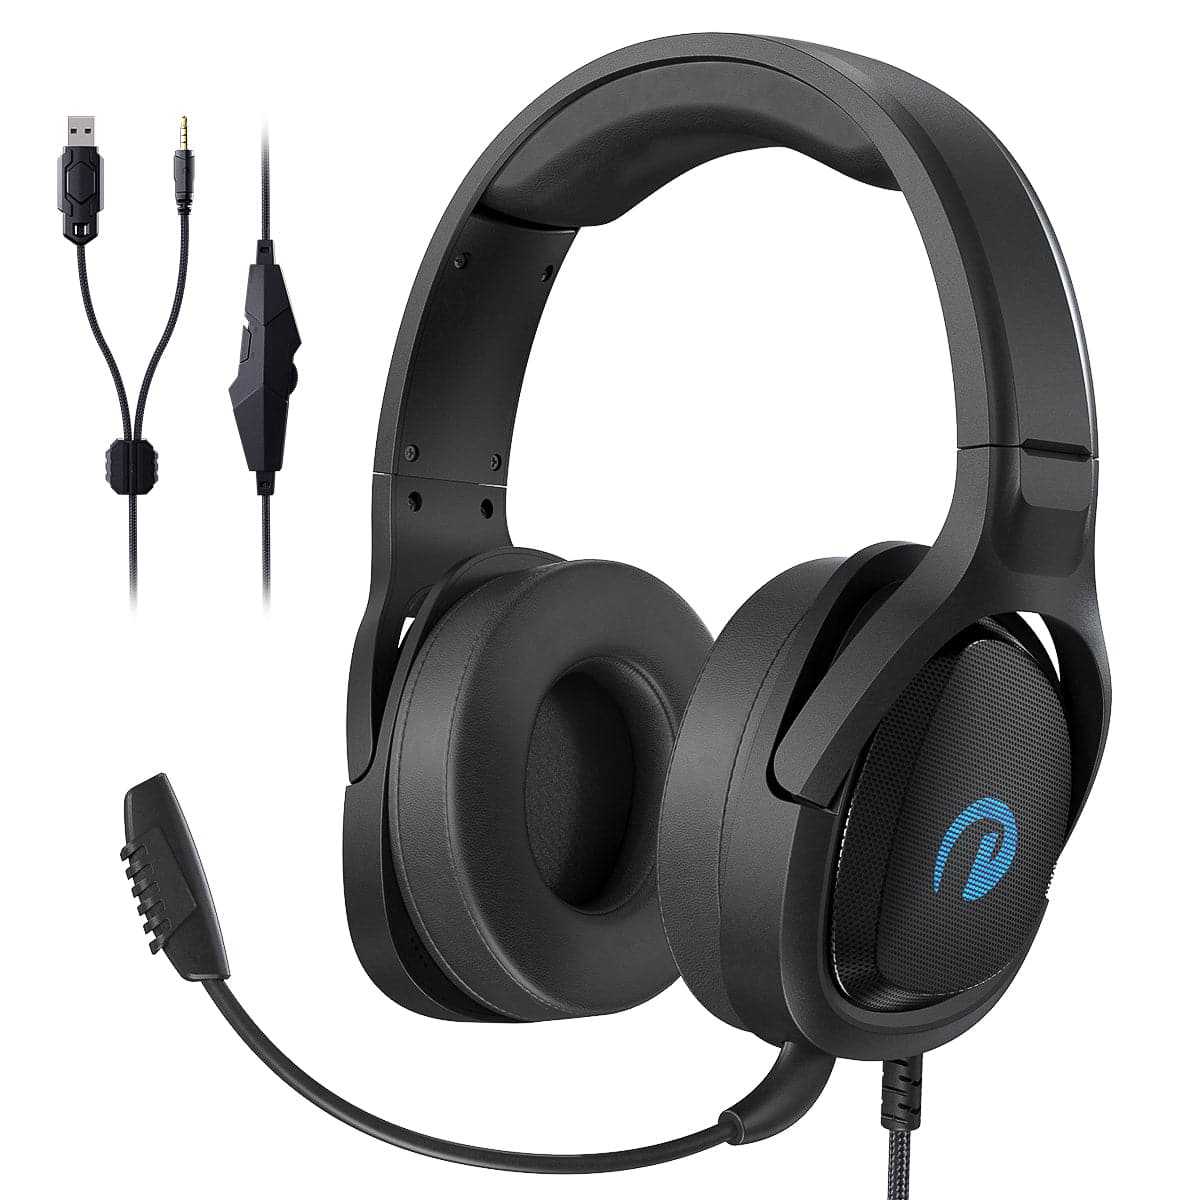 Fosi Audio GH5000 Stereo Gaming Headset, Mobile Devices with Surround Sound - Fosi Audio